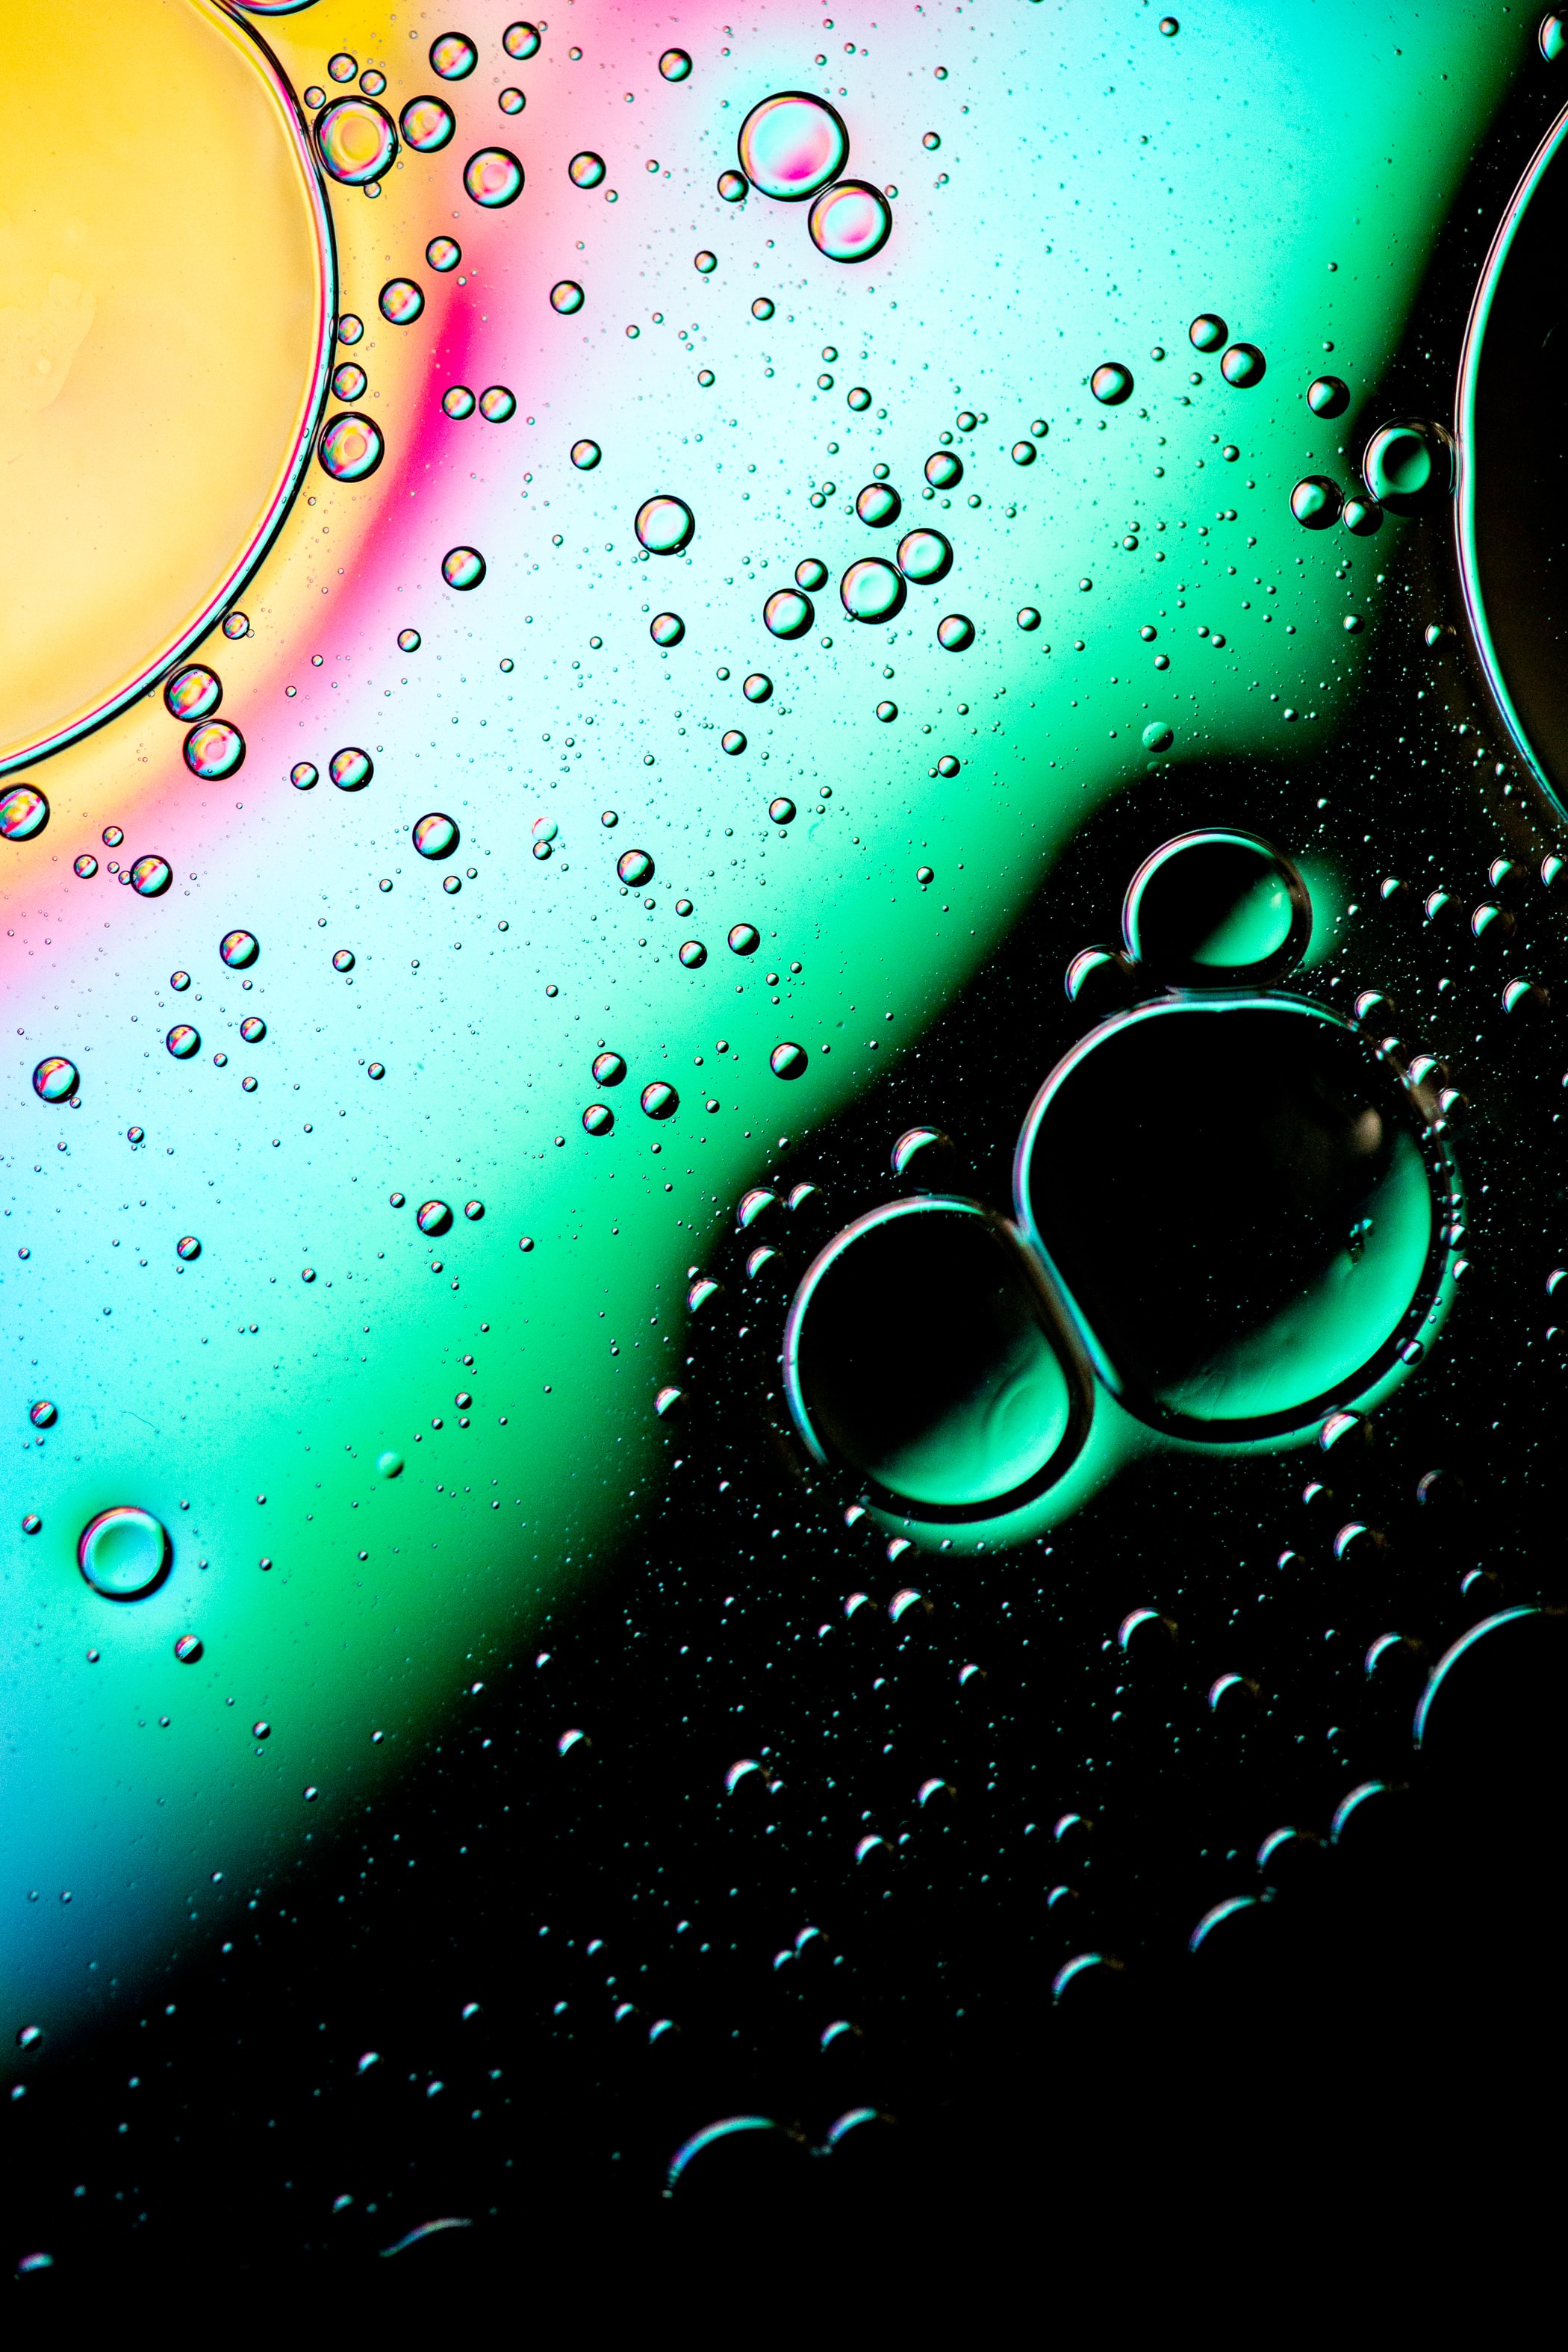 multicolored, abstract, water, bubbles, drops, motley, gradient for Windows